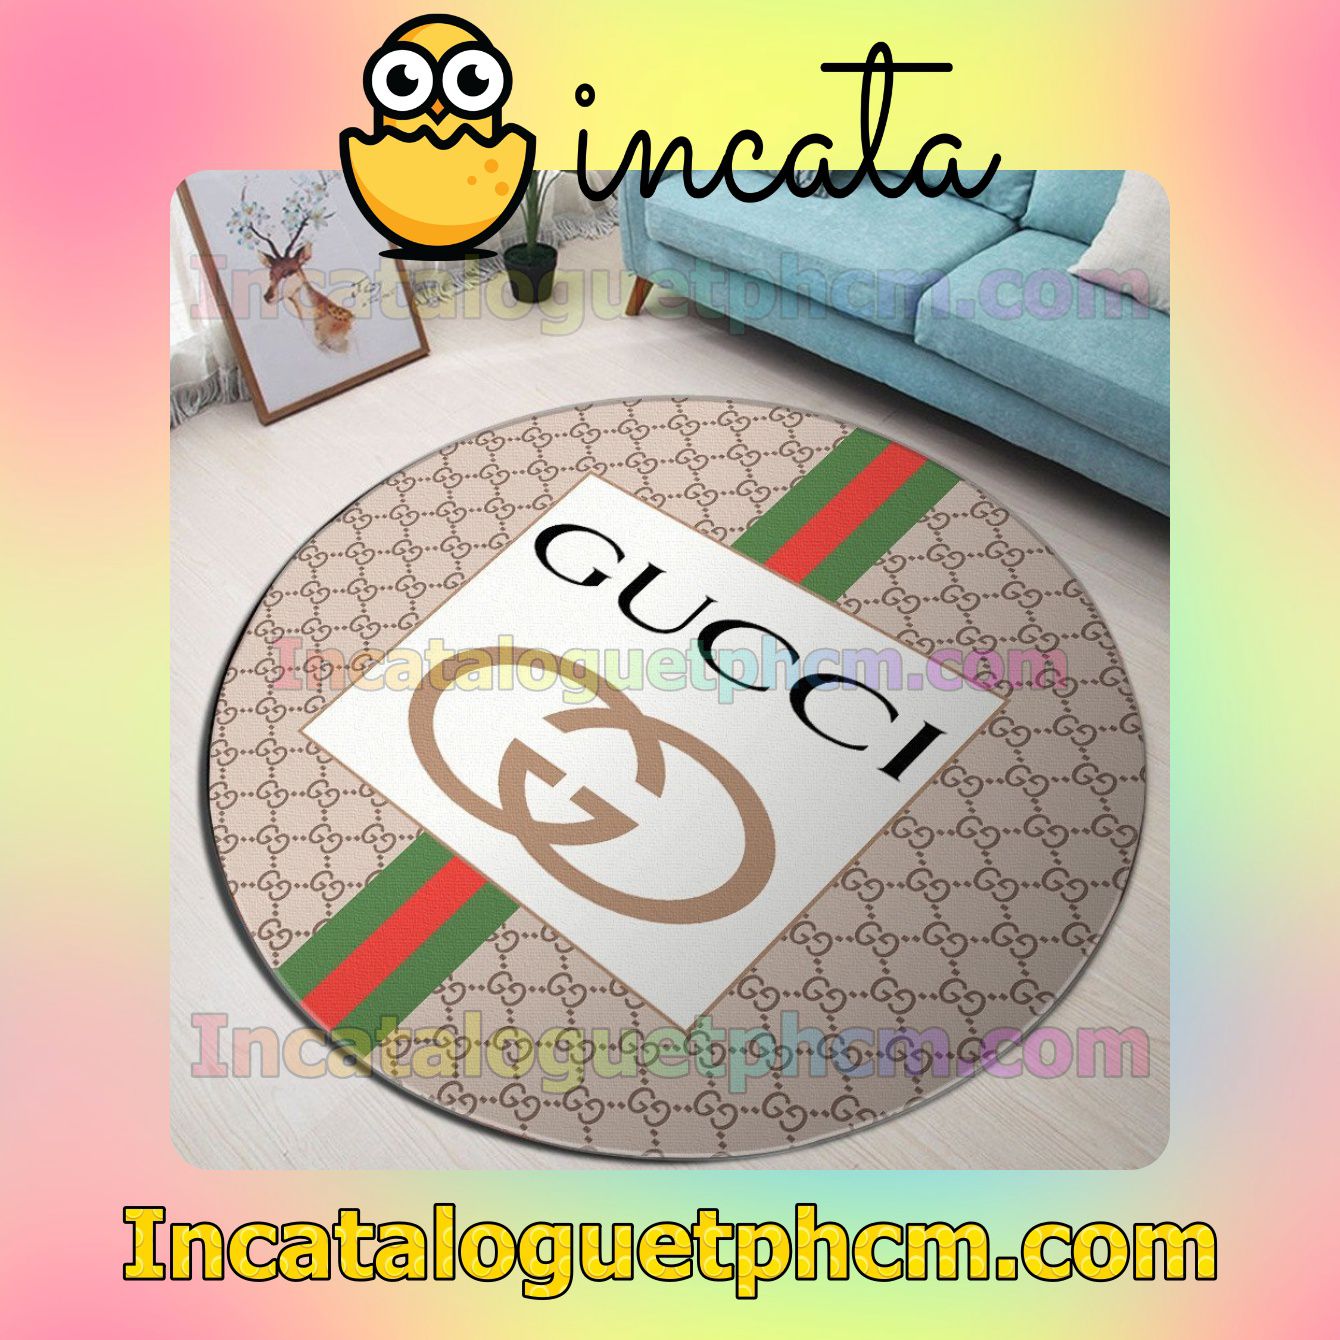 Gucci Beige Monogram With Logo In White Square And Color Stripes Round Carpet Rugs For Kitchen